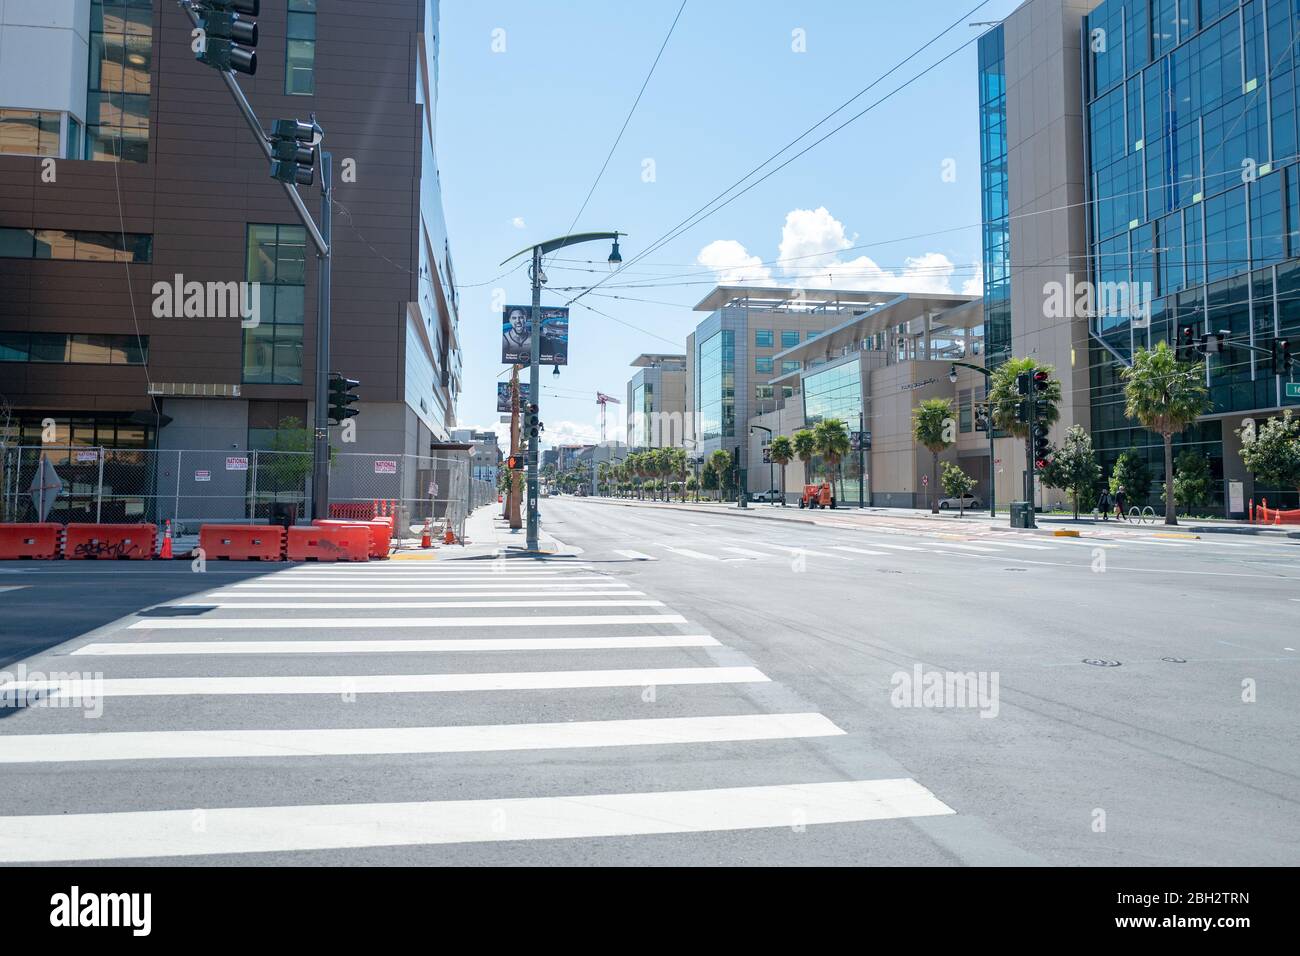 Streets were nearly empty during a shelter in place order in Mission Bay, San Francisco, California during an outbreak of the COVID-19 coronavirus, March 26, 2020. () Stock Photo